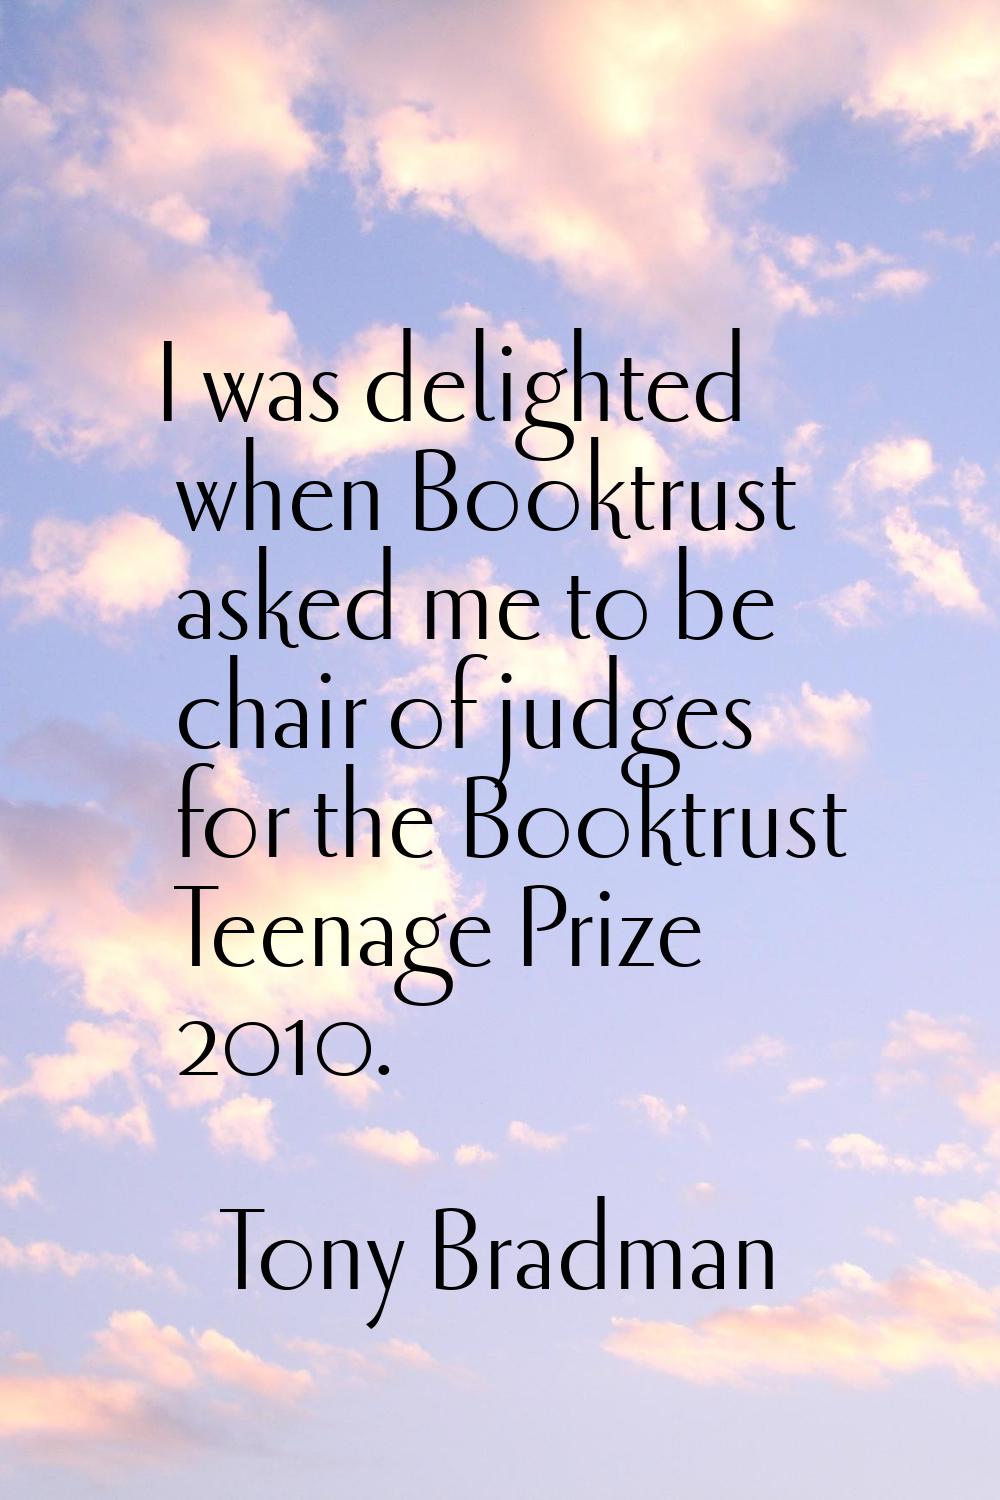 I was delighted when Booktrust asked me to be chair of judges for the Booktrust Teenage Prize 2010.